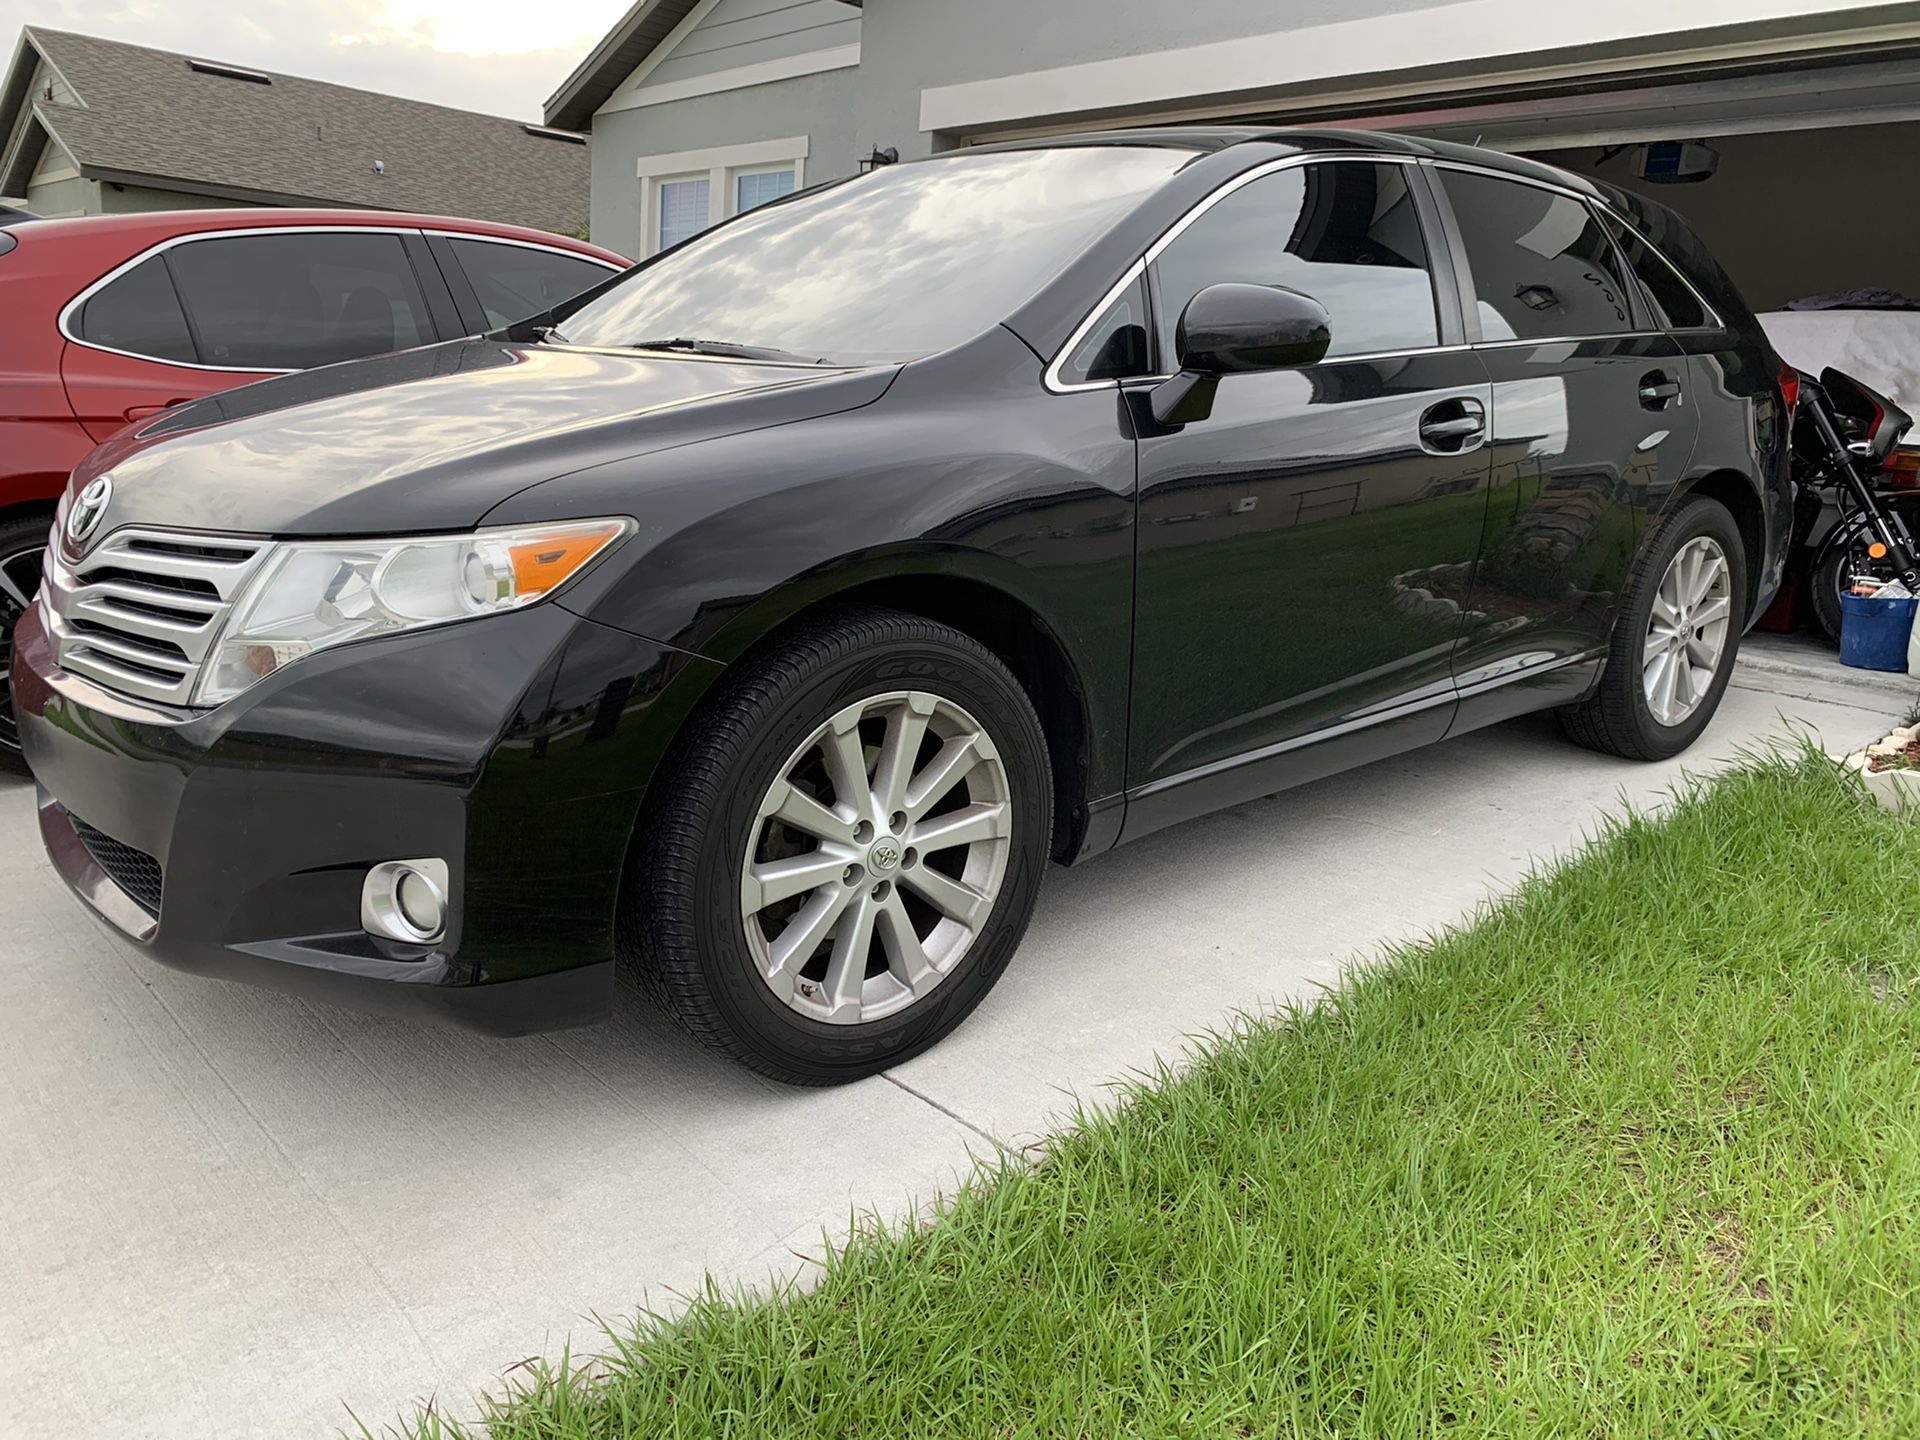 Toyota Venza 19” wheels with tires